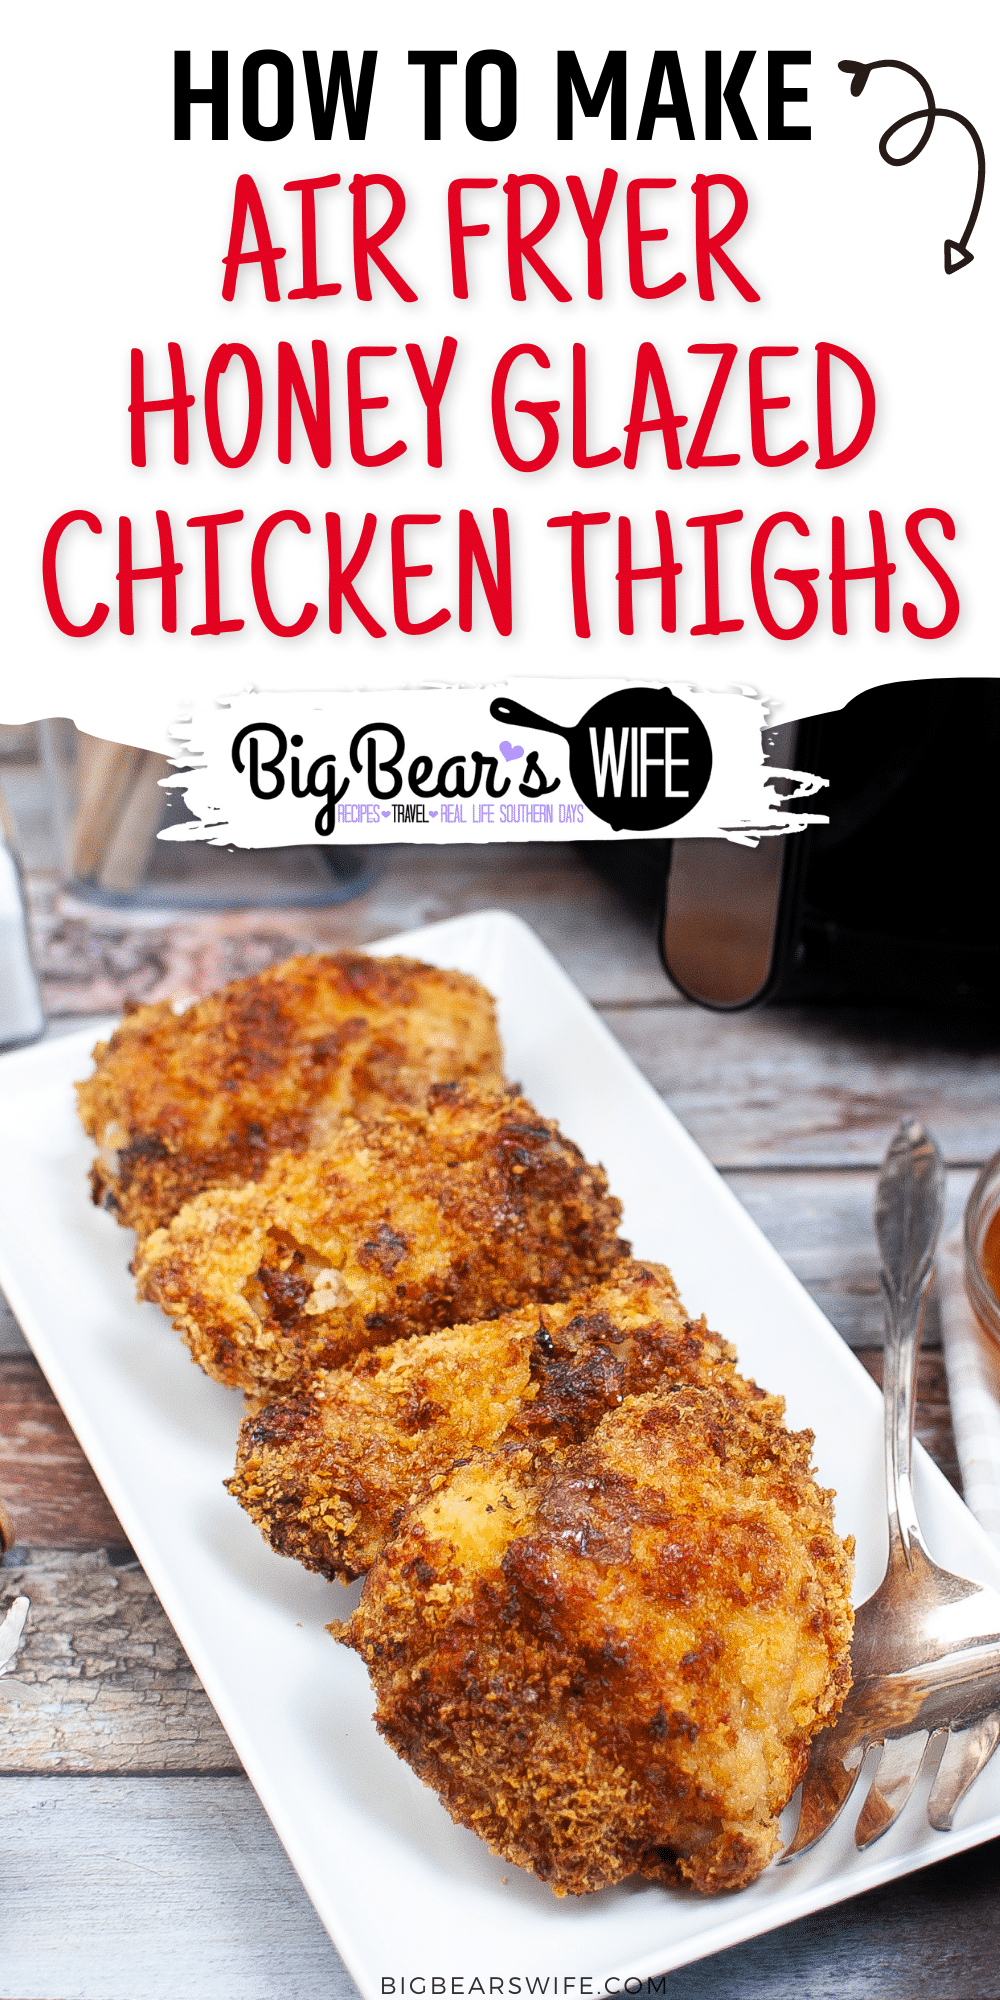 Air Fryer Honey Glazed Chicken Thighs - seasoned and panko breaded chicken thighs are air fried to perfection and then slathered with an easy homemade honey sauce for the perfect dinner! via @bigbearswife